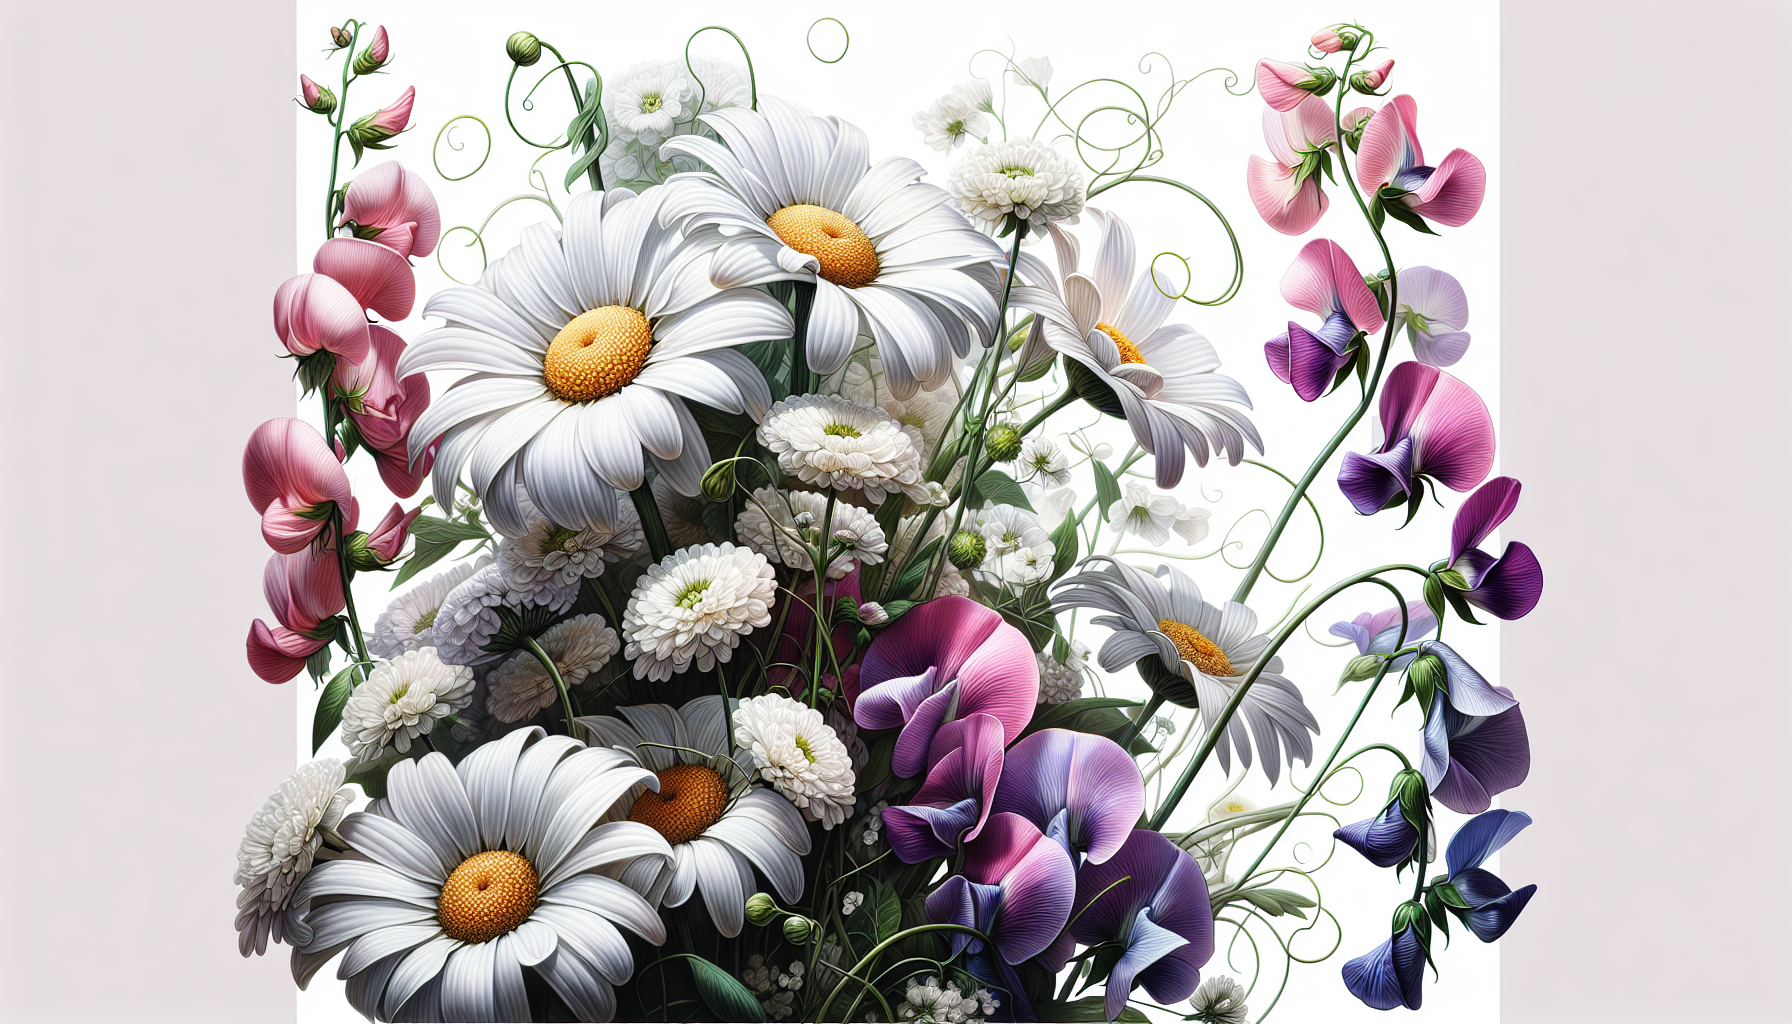 Illustration of daisies and sweet peas in a bouquet